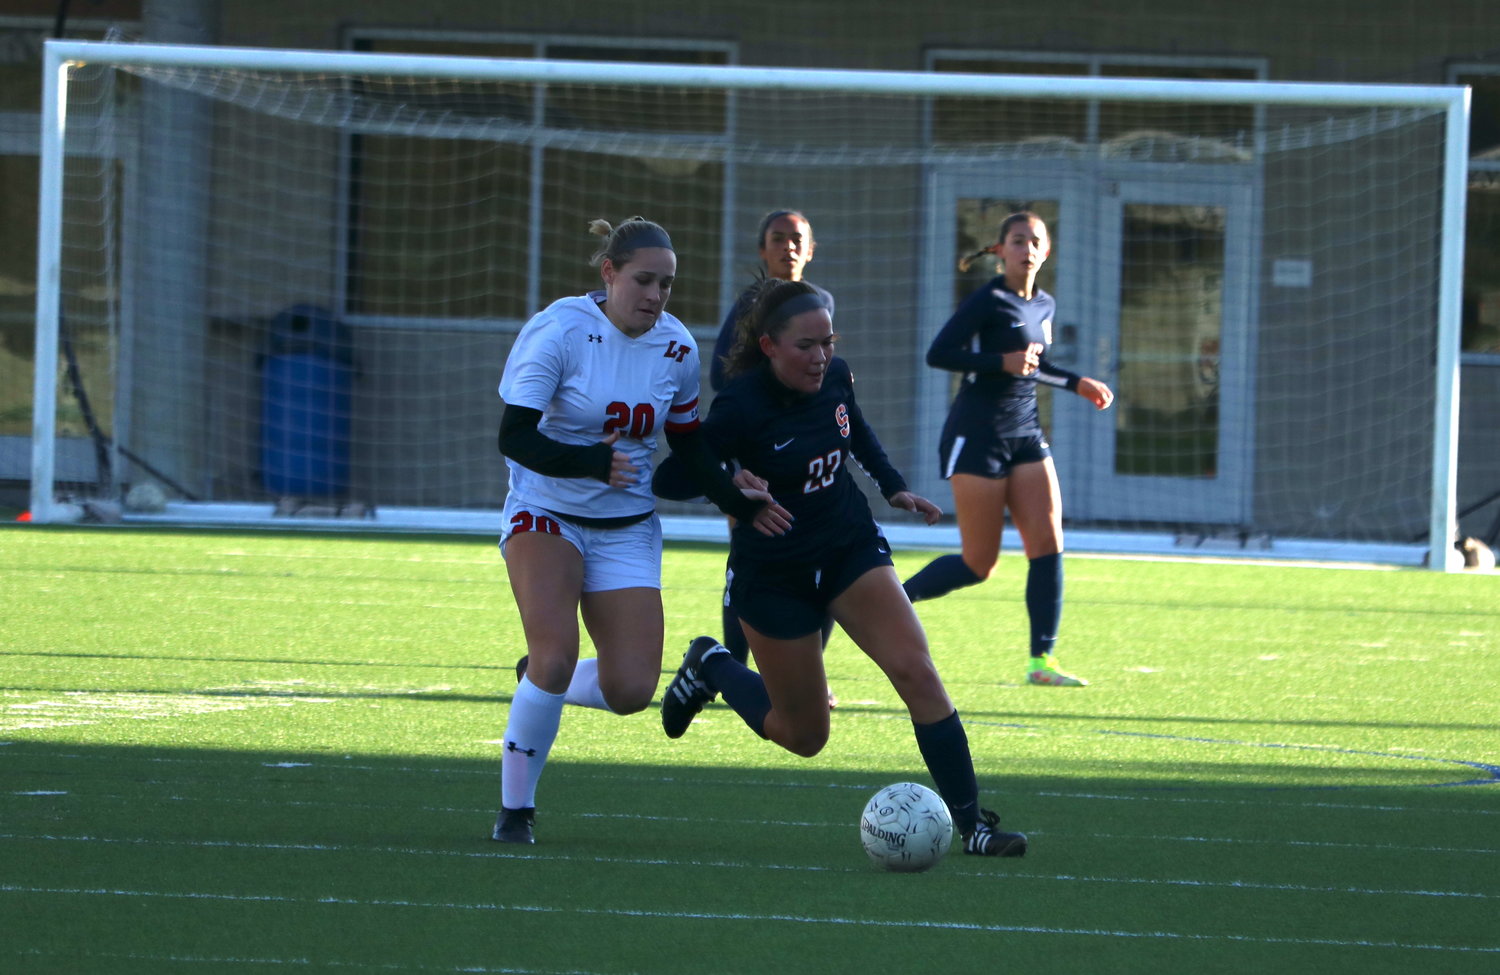 Laura Davis battles to gain possession of the ball during Saturday’s game between Seven Lakes and Lake Travis at Legacy Stadium.